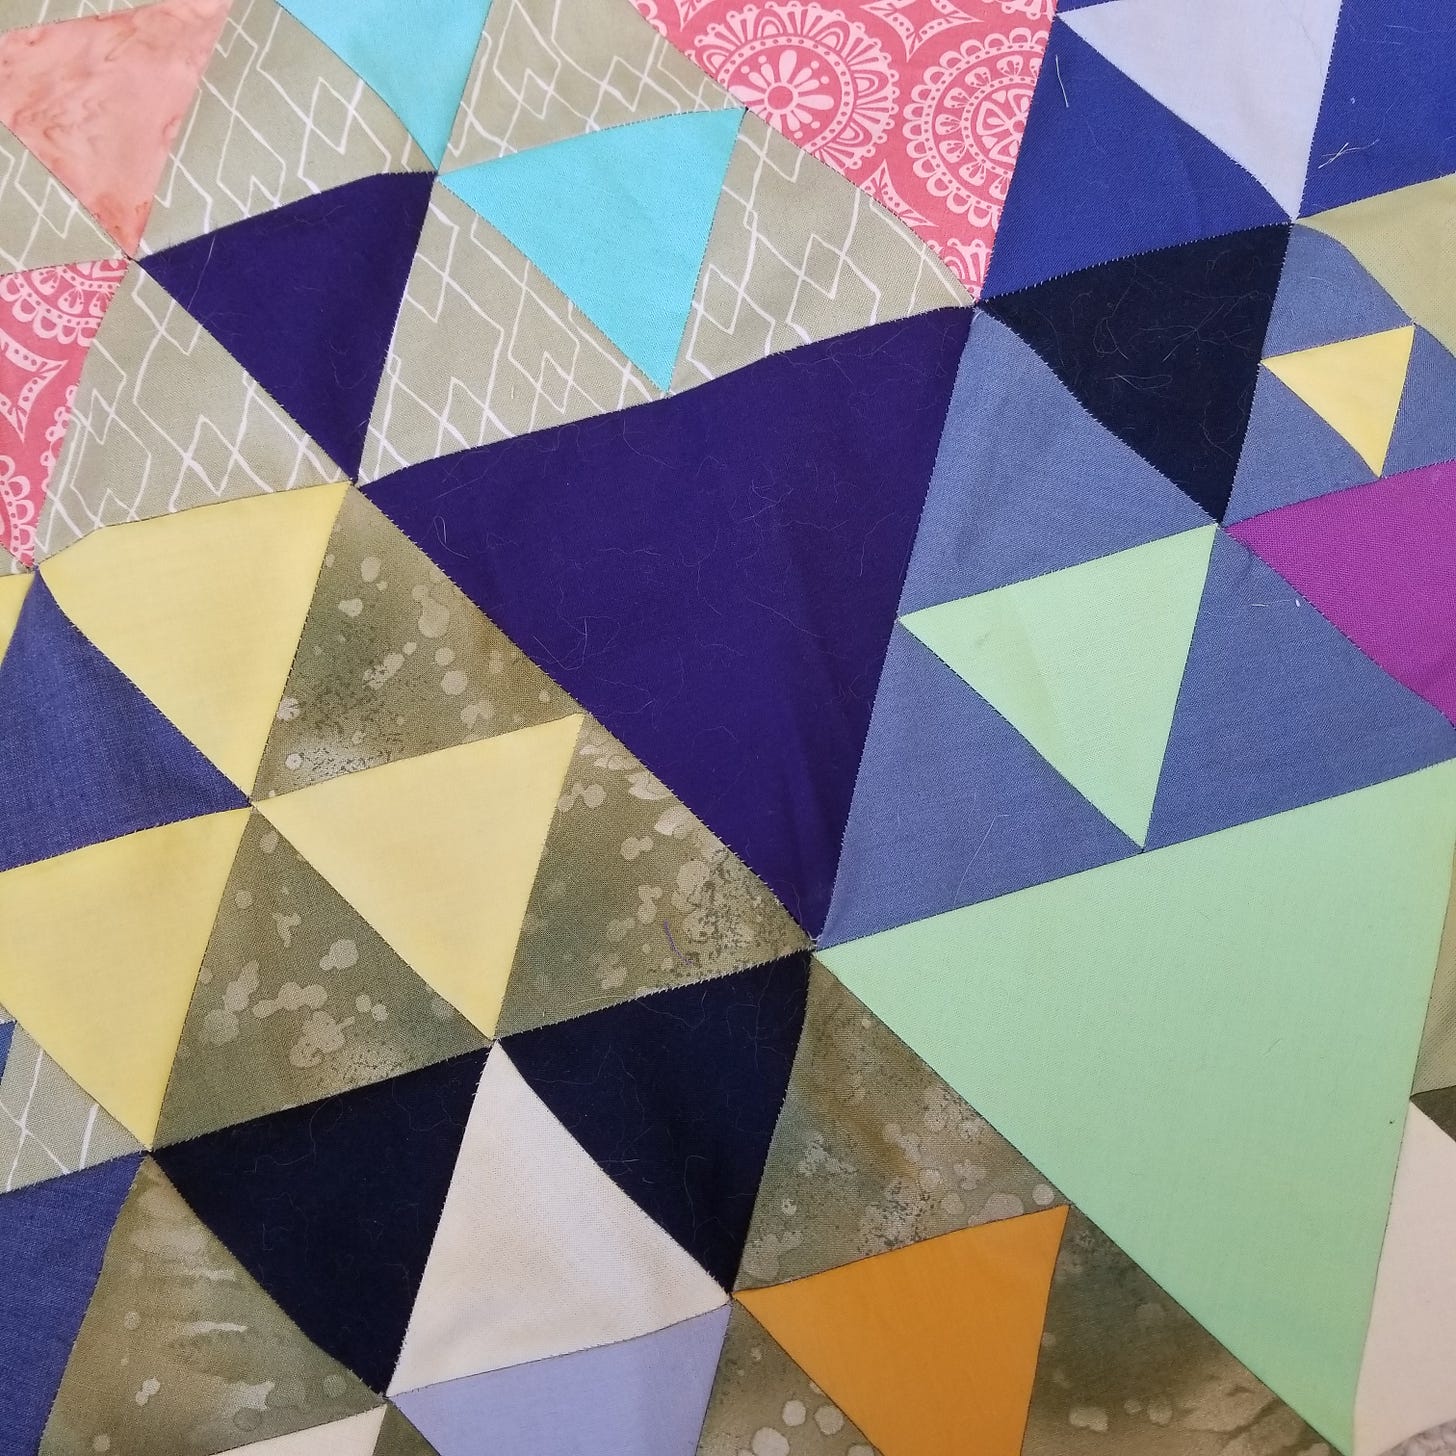 Quilt pic: various sized triangles of different colors